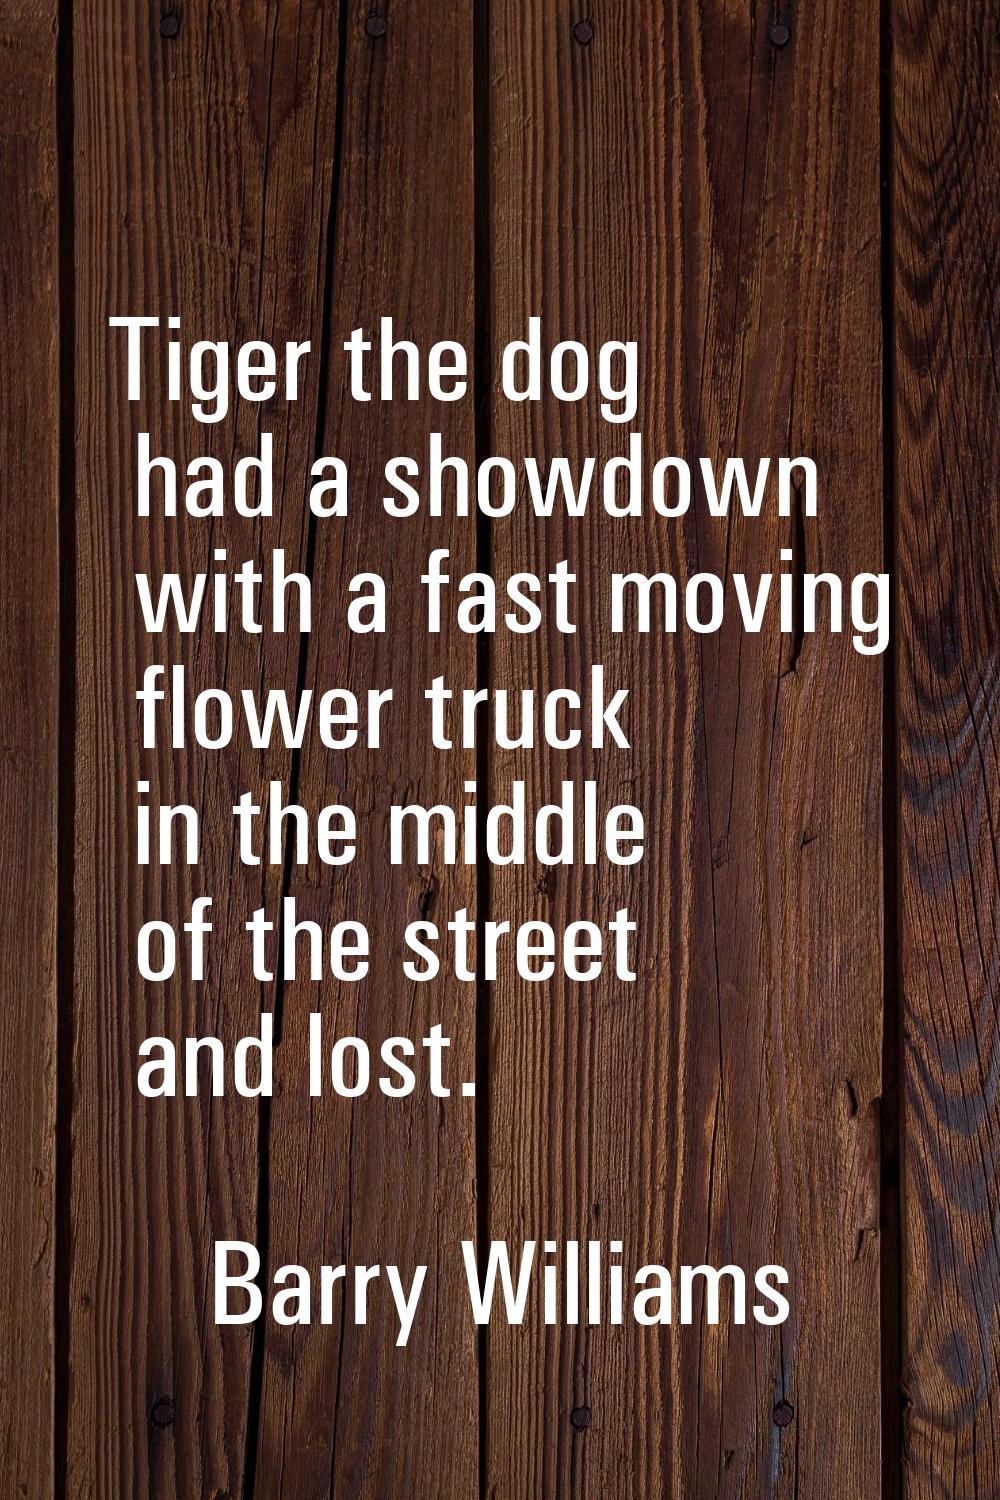 Tiger the dog had a showdown with a fast moving flower truck in the middle of the street and lost.